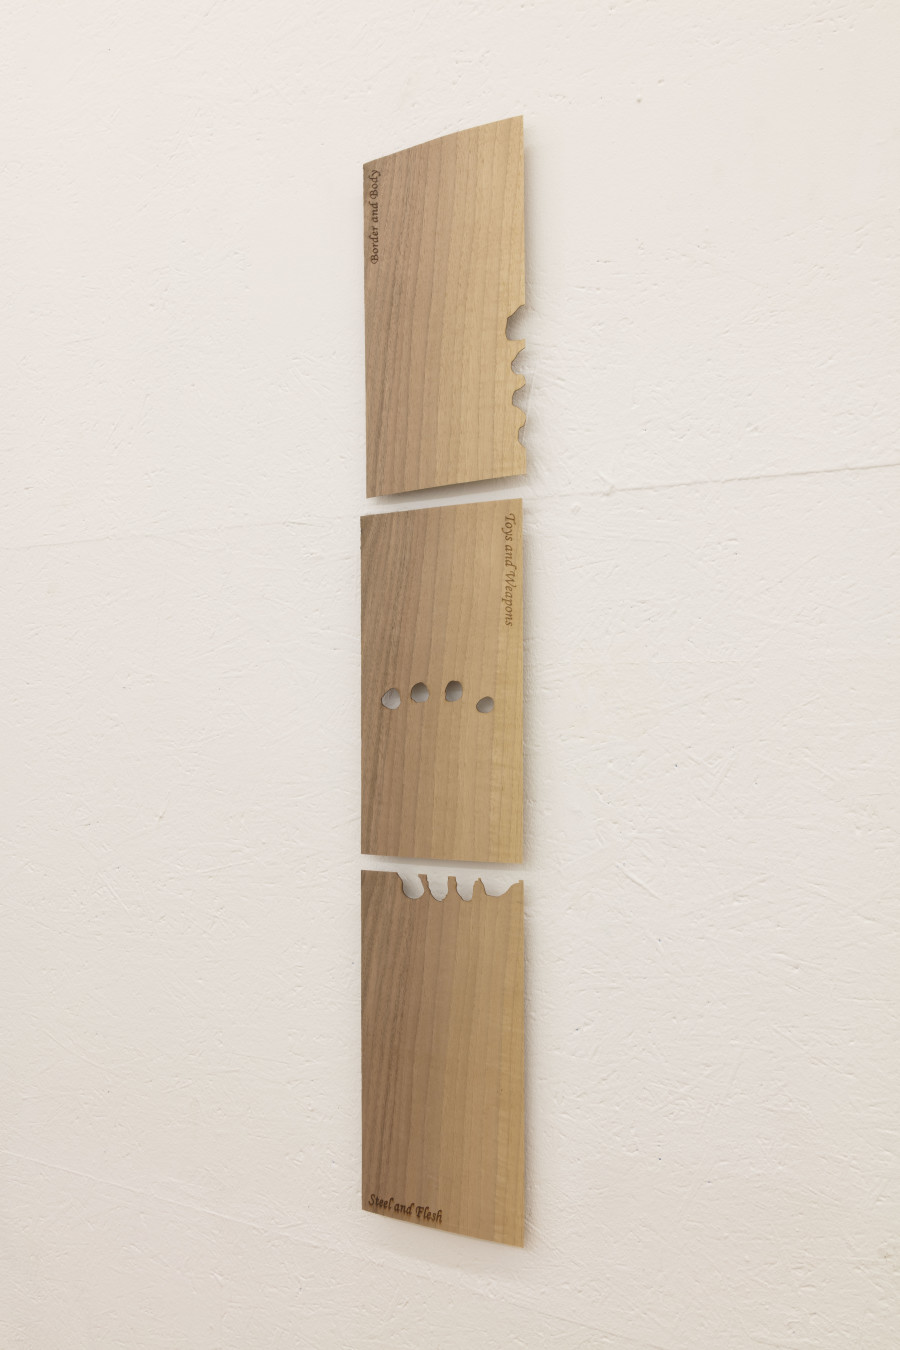 Exhibition view, Kay Yoon – PLAY, TOUCH, GRIP, sic! Elephanthouse, 2021. Photo credit: Andri Stadler